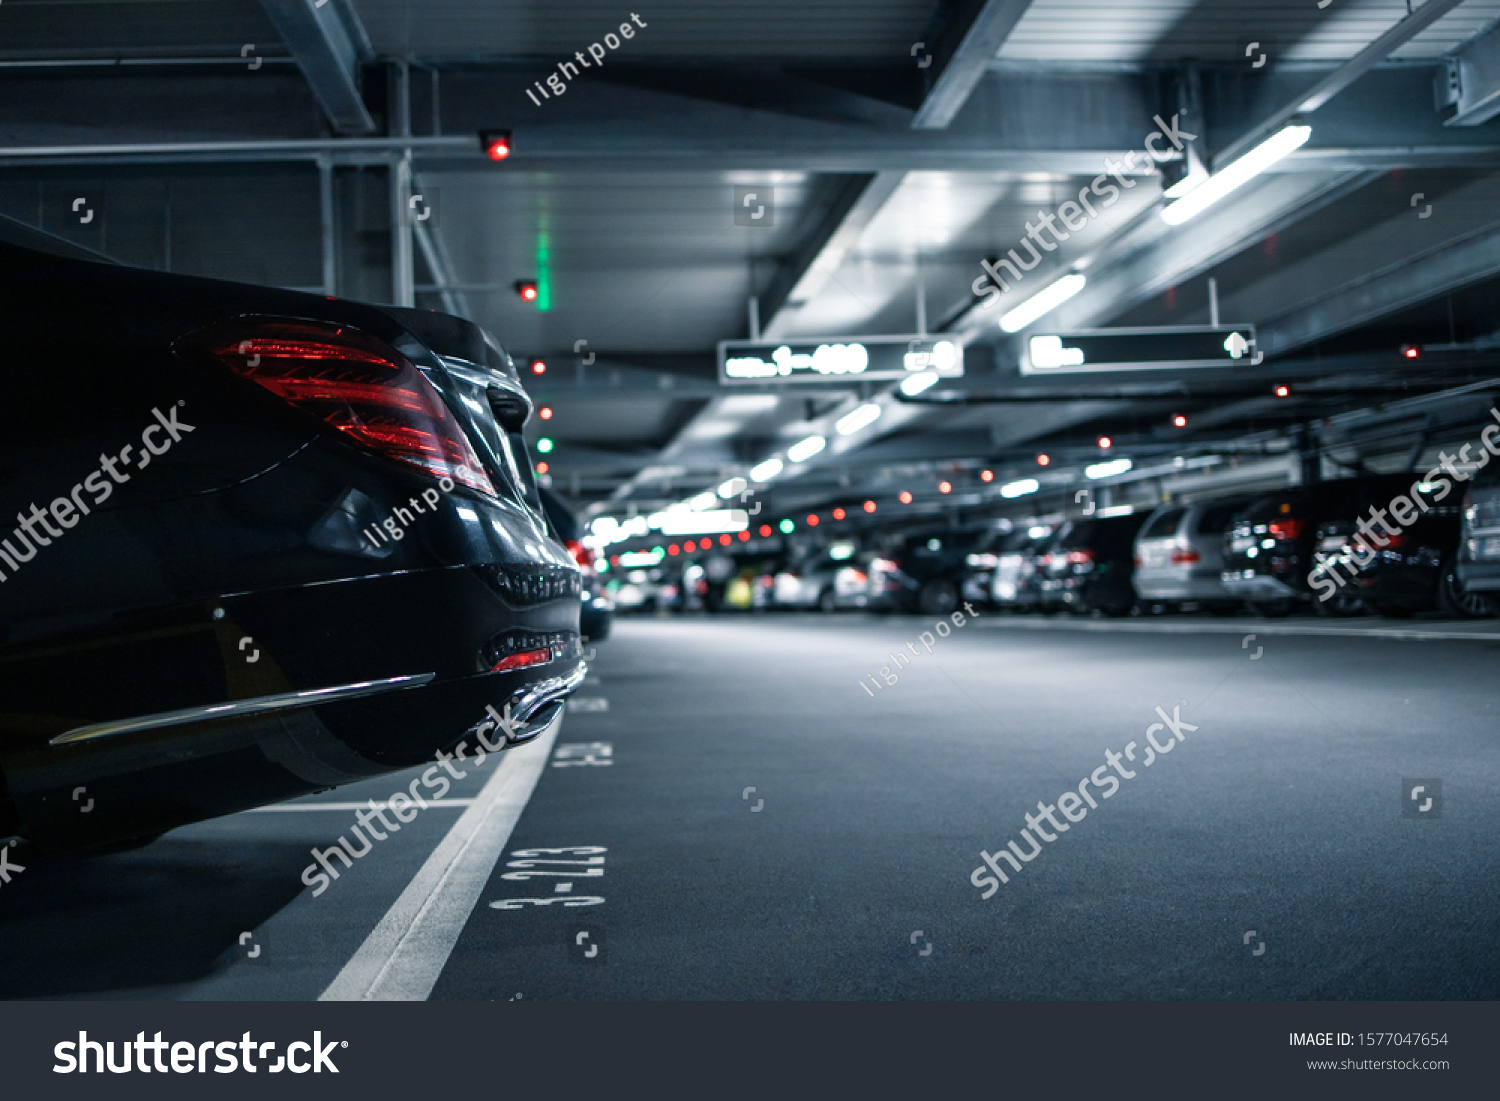 Underground garage or modern car parking with lots of vehicles #1577047654